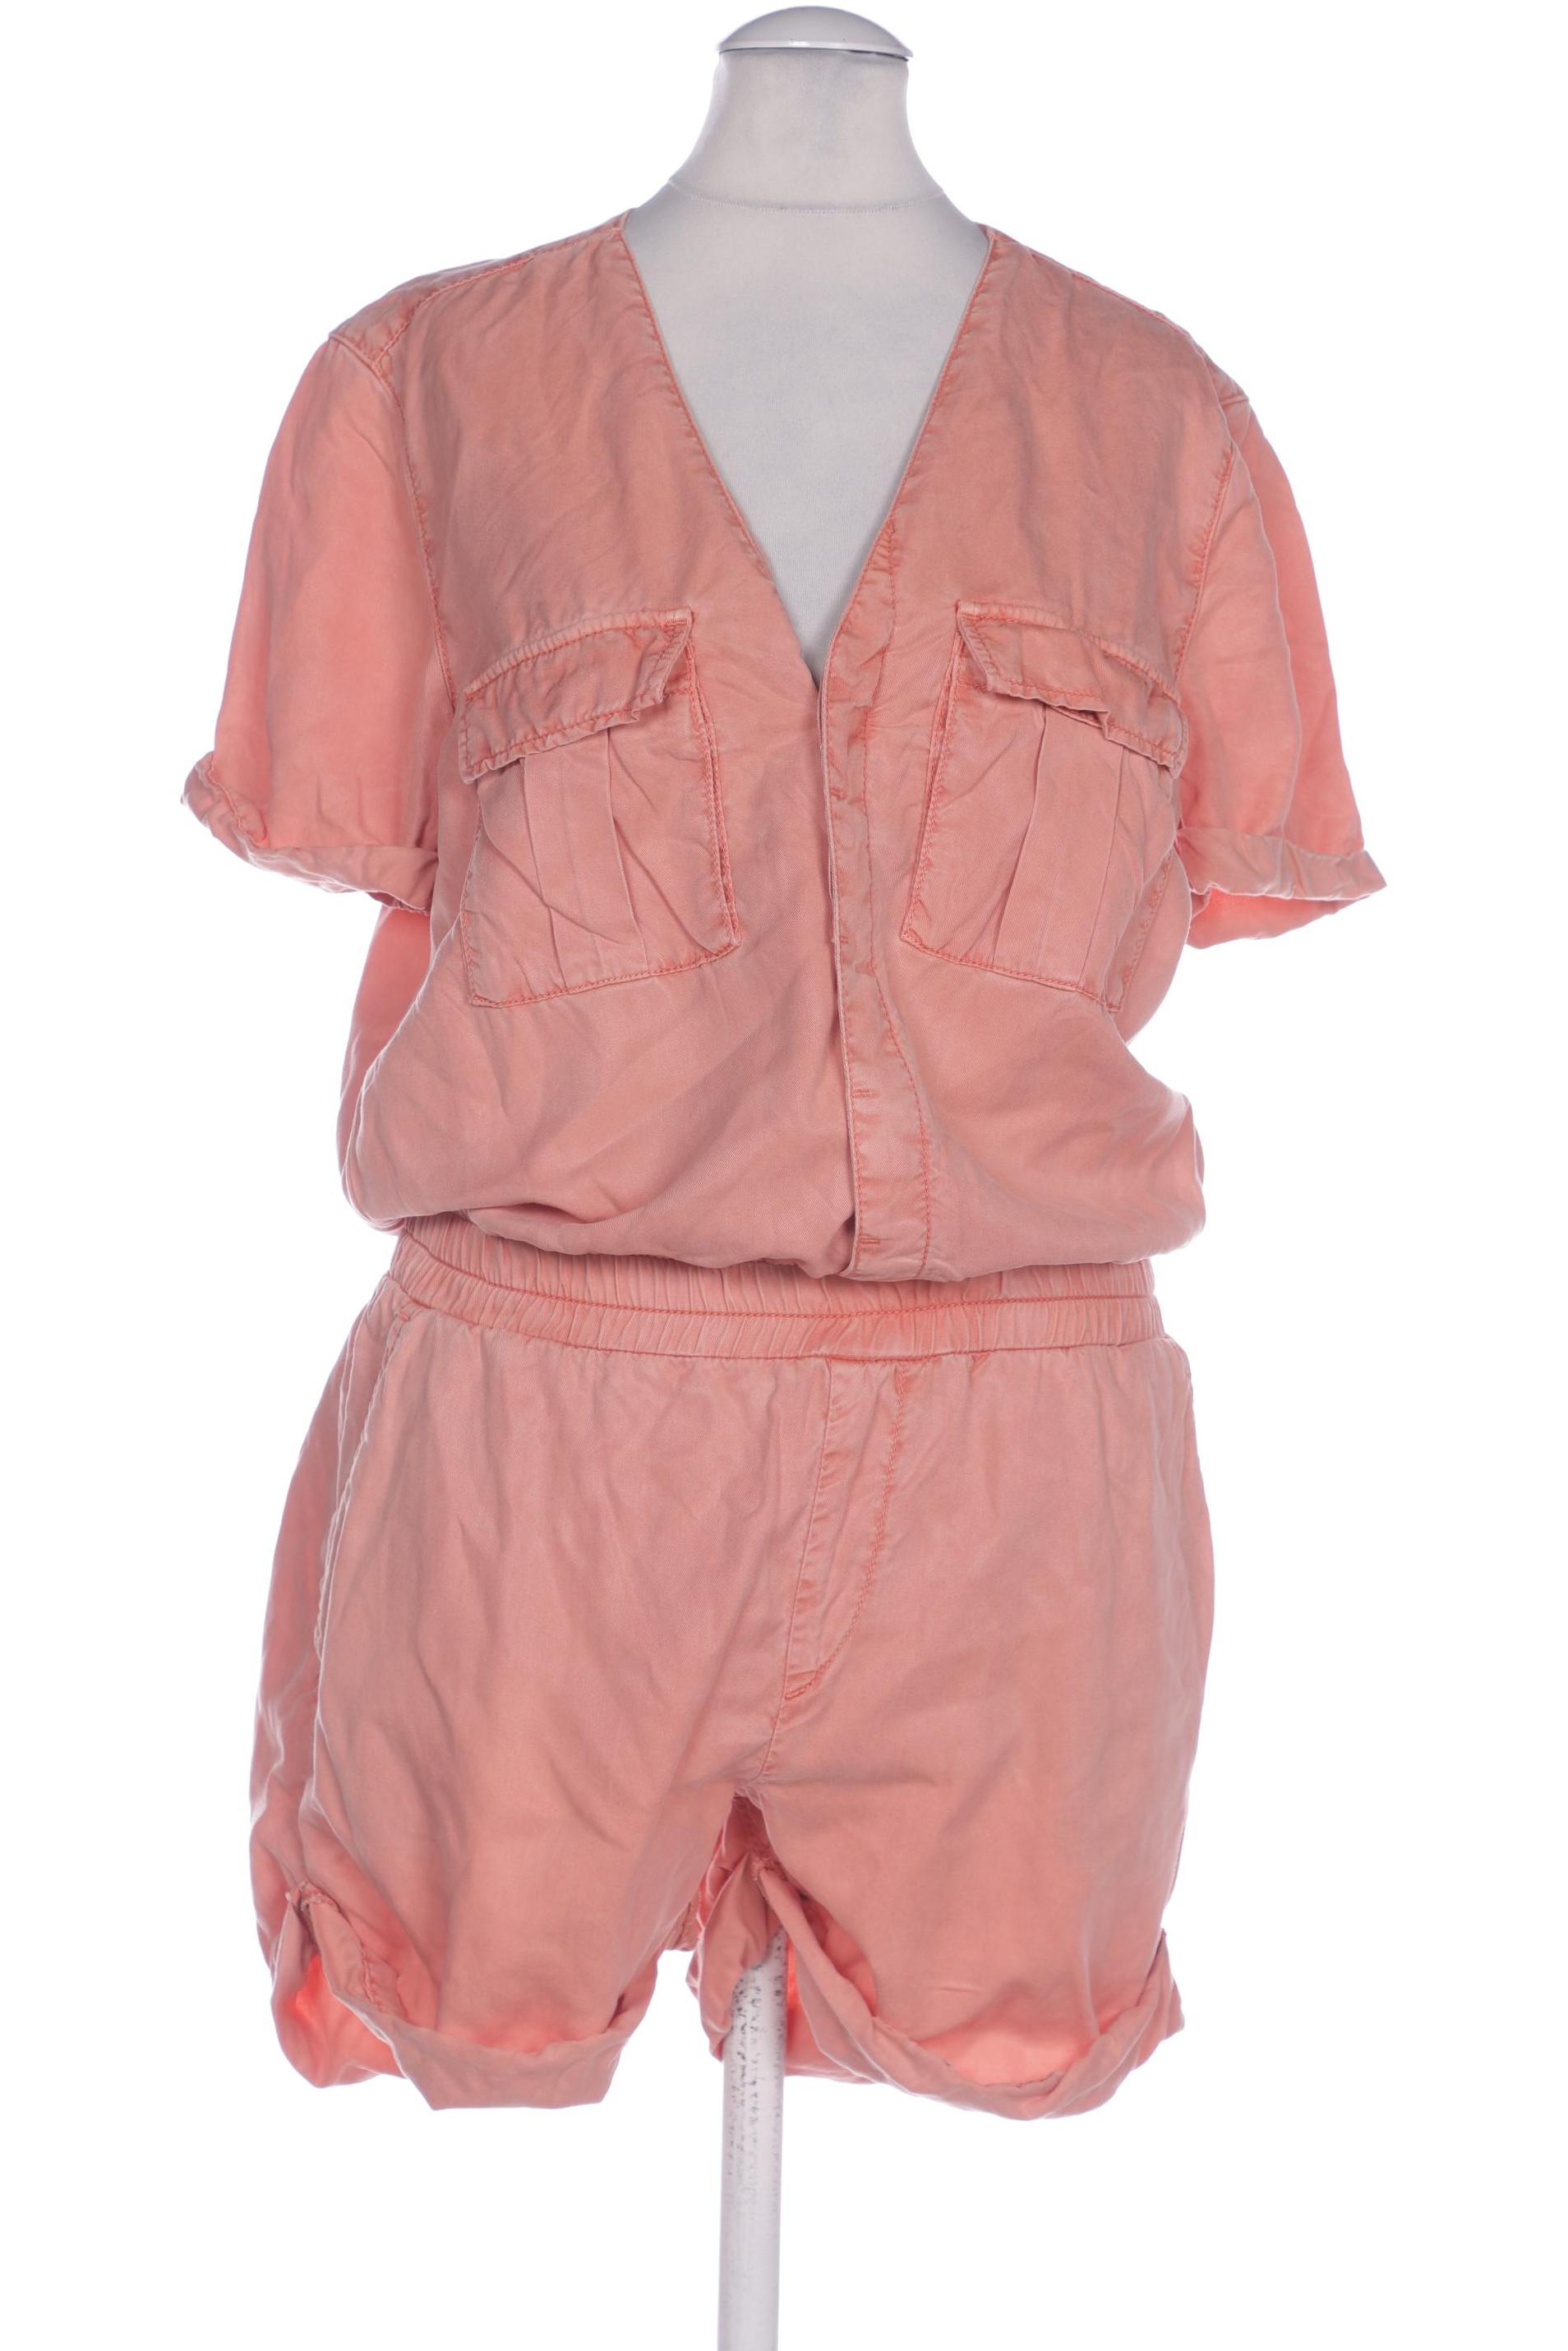 Pepe Jeans Damen Jumpsuit/Overall, pink, Gr. 36 von Pepe Jeans